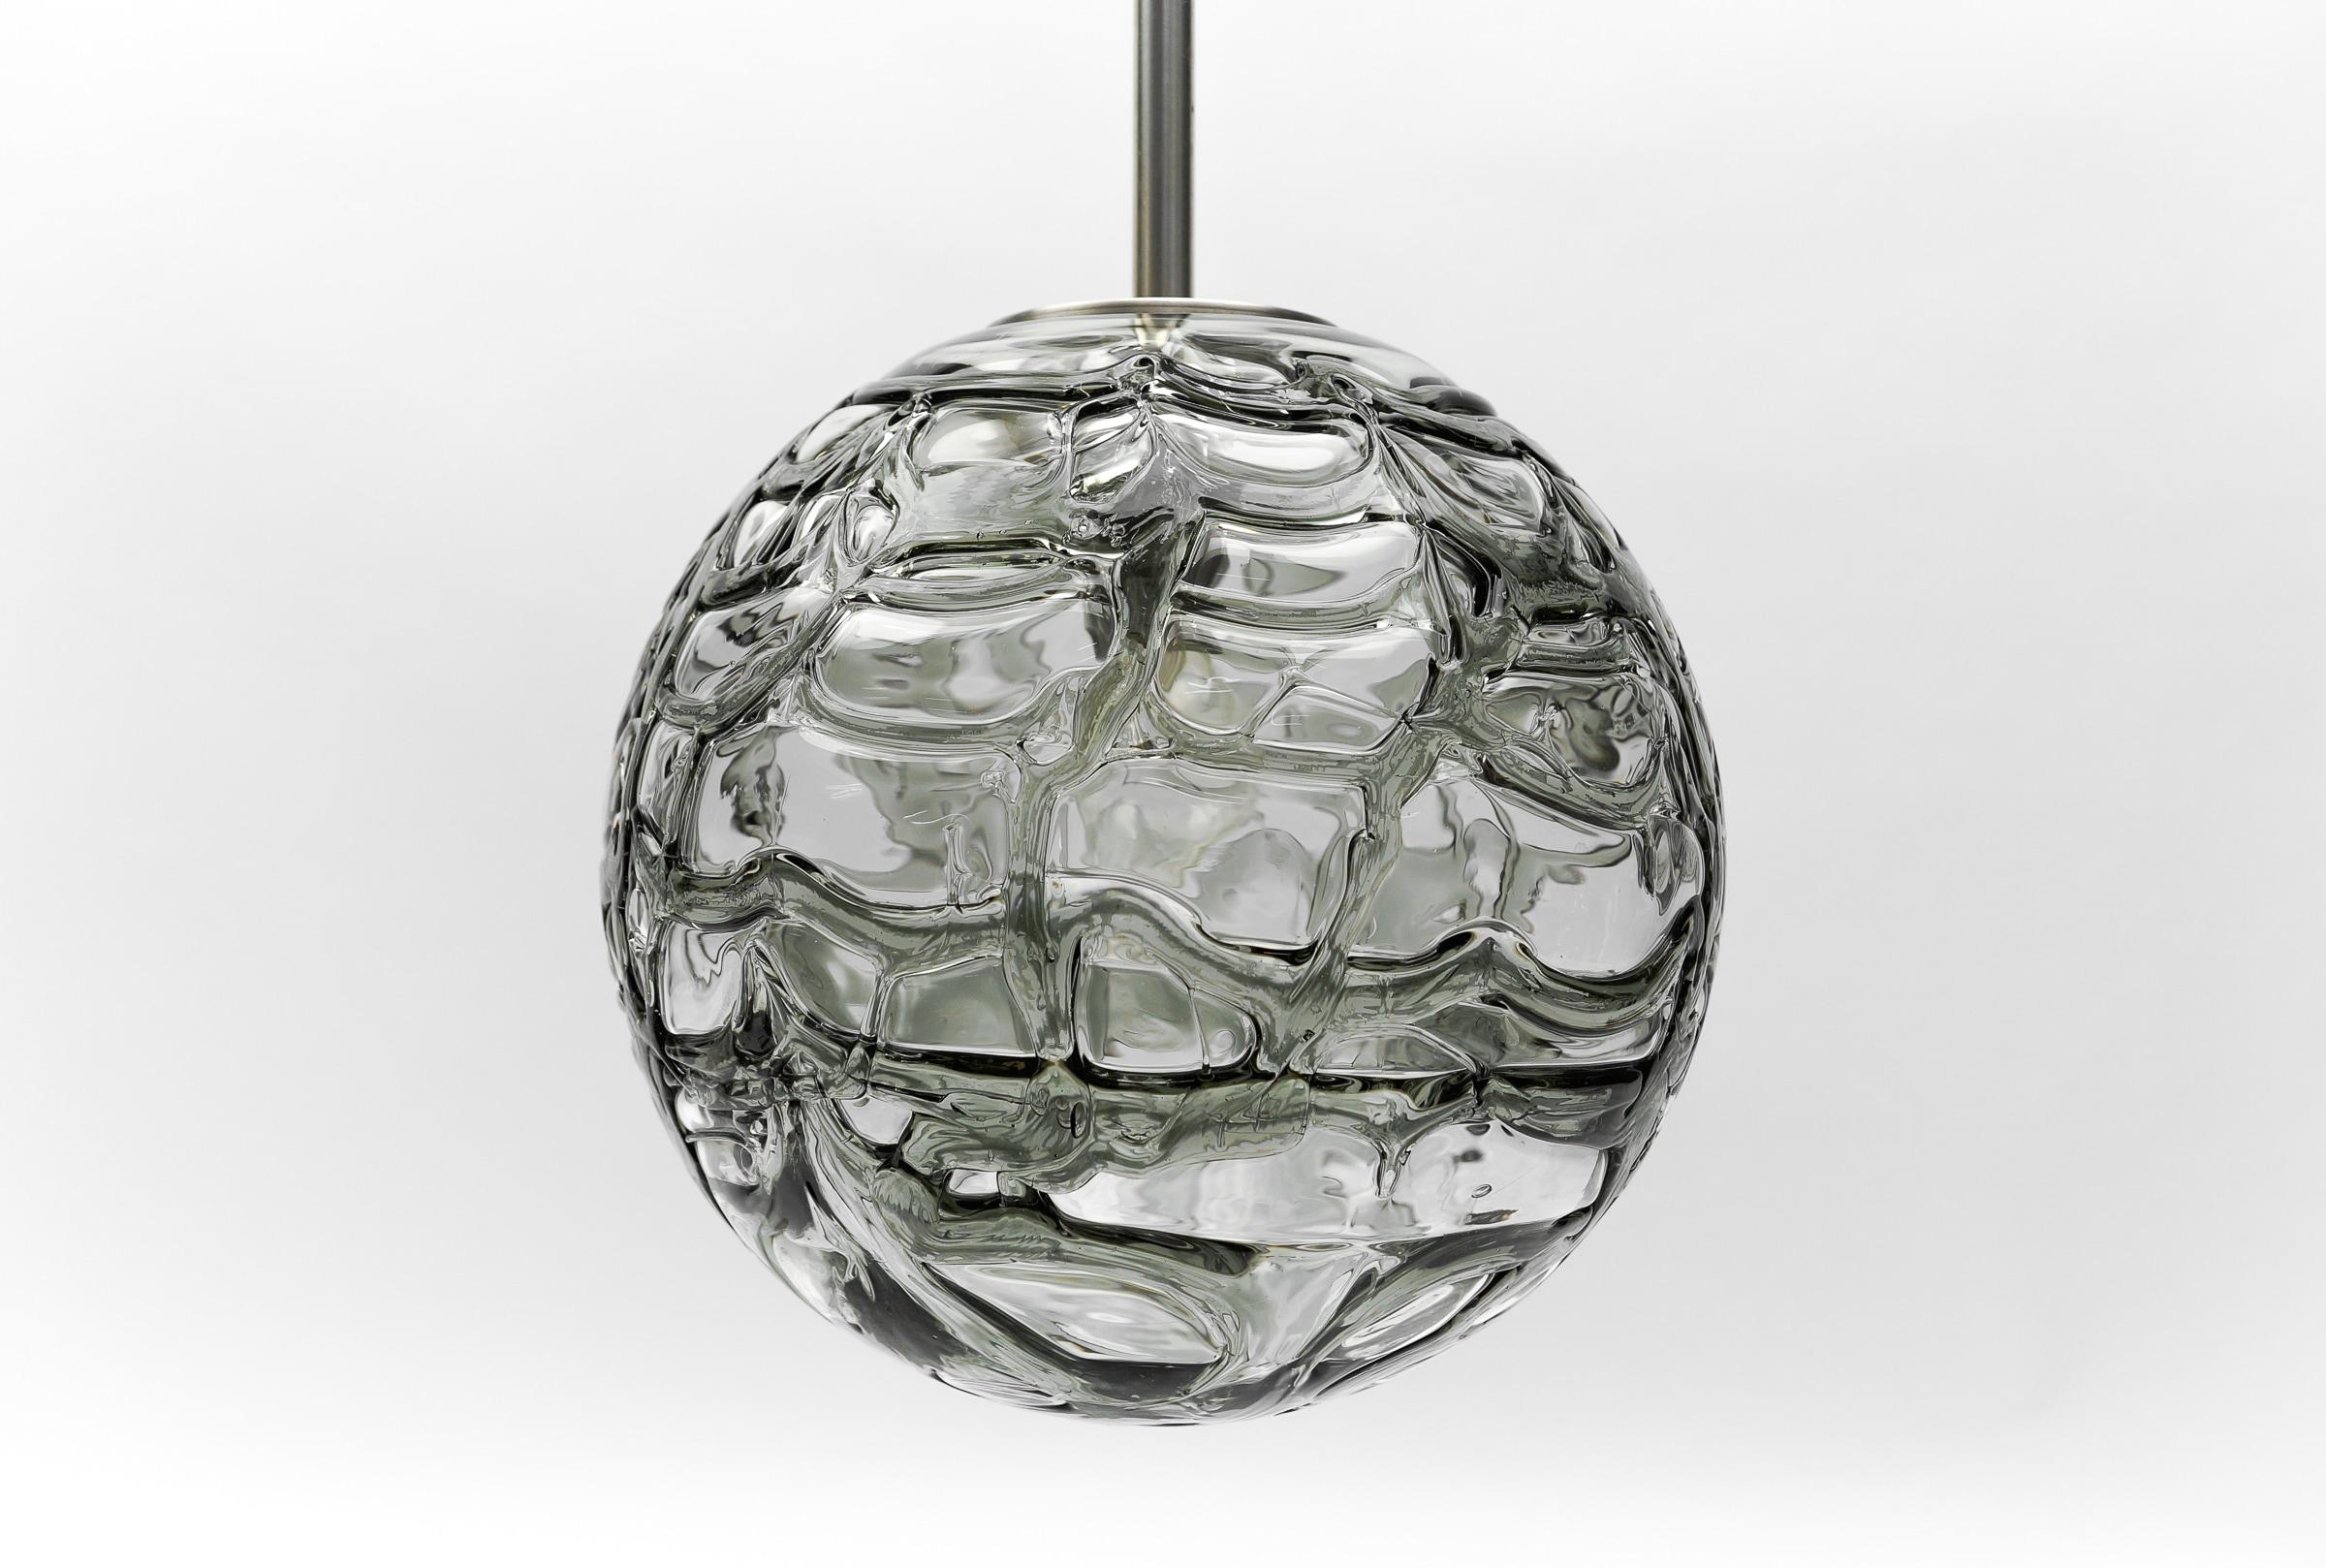 Lovely Black Murano Glass Ball Pendant Lamp by Doria, - 1960s Germany For Sale 1